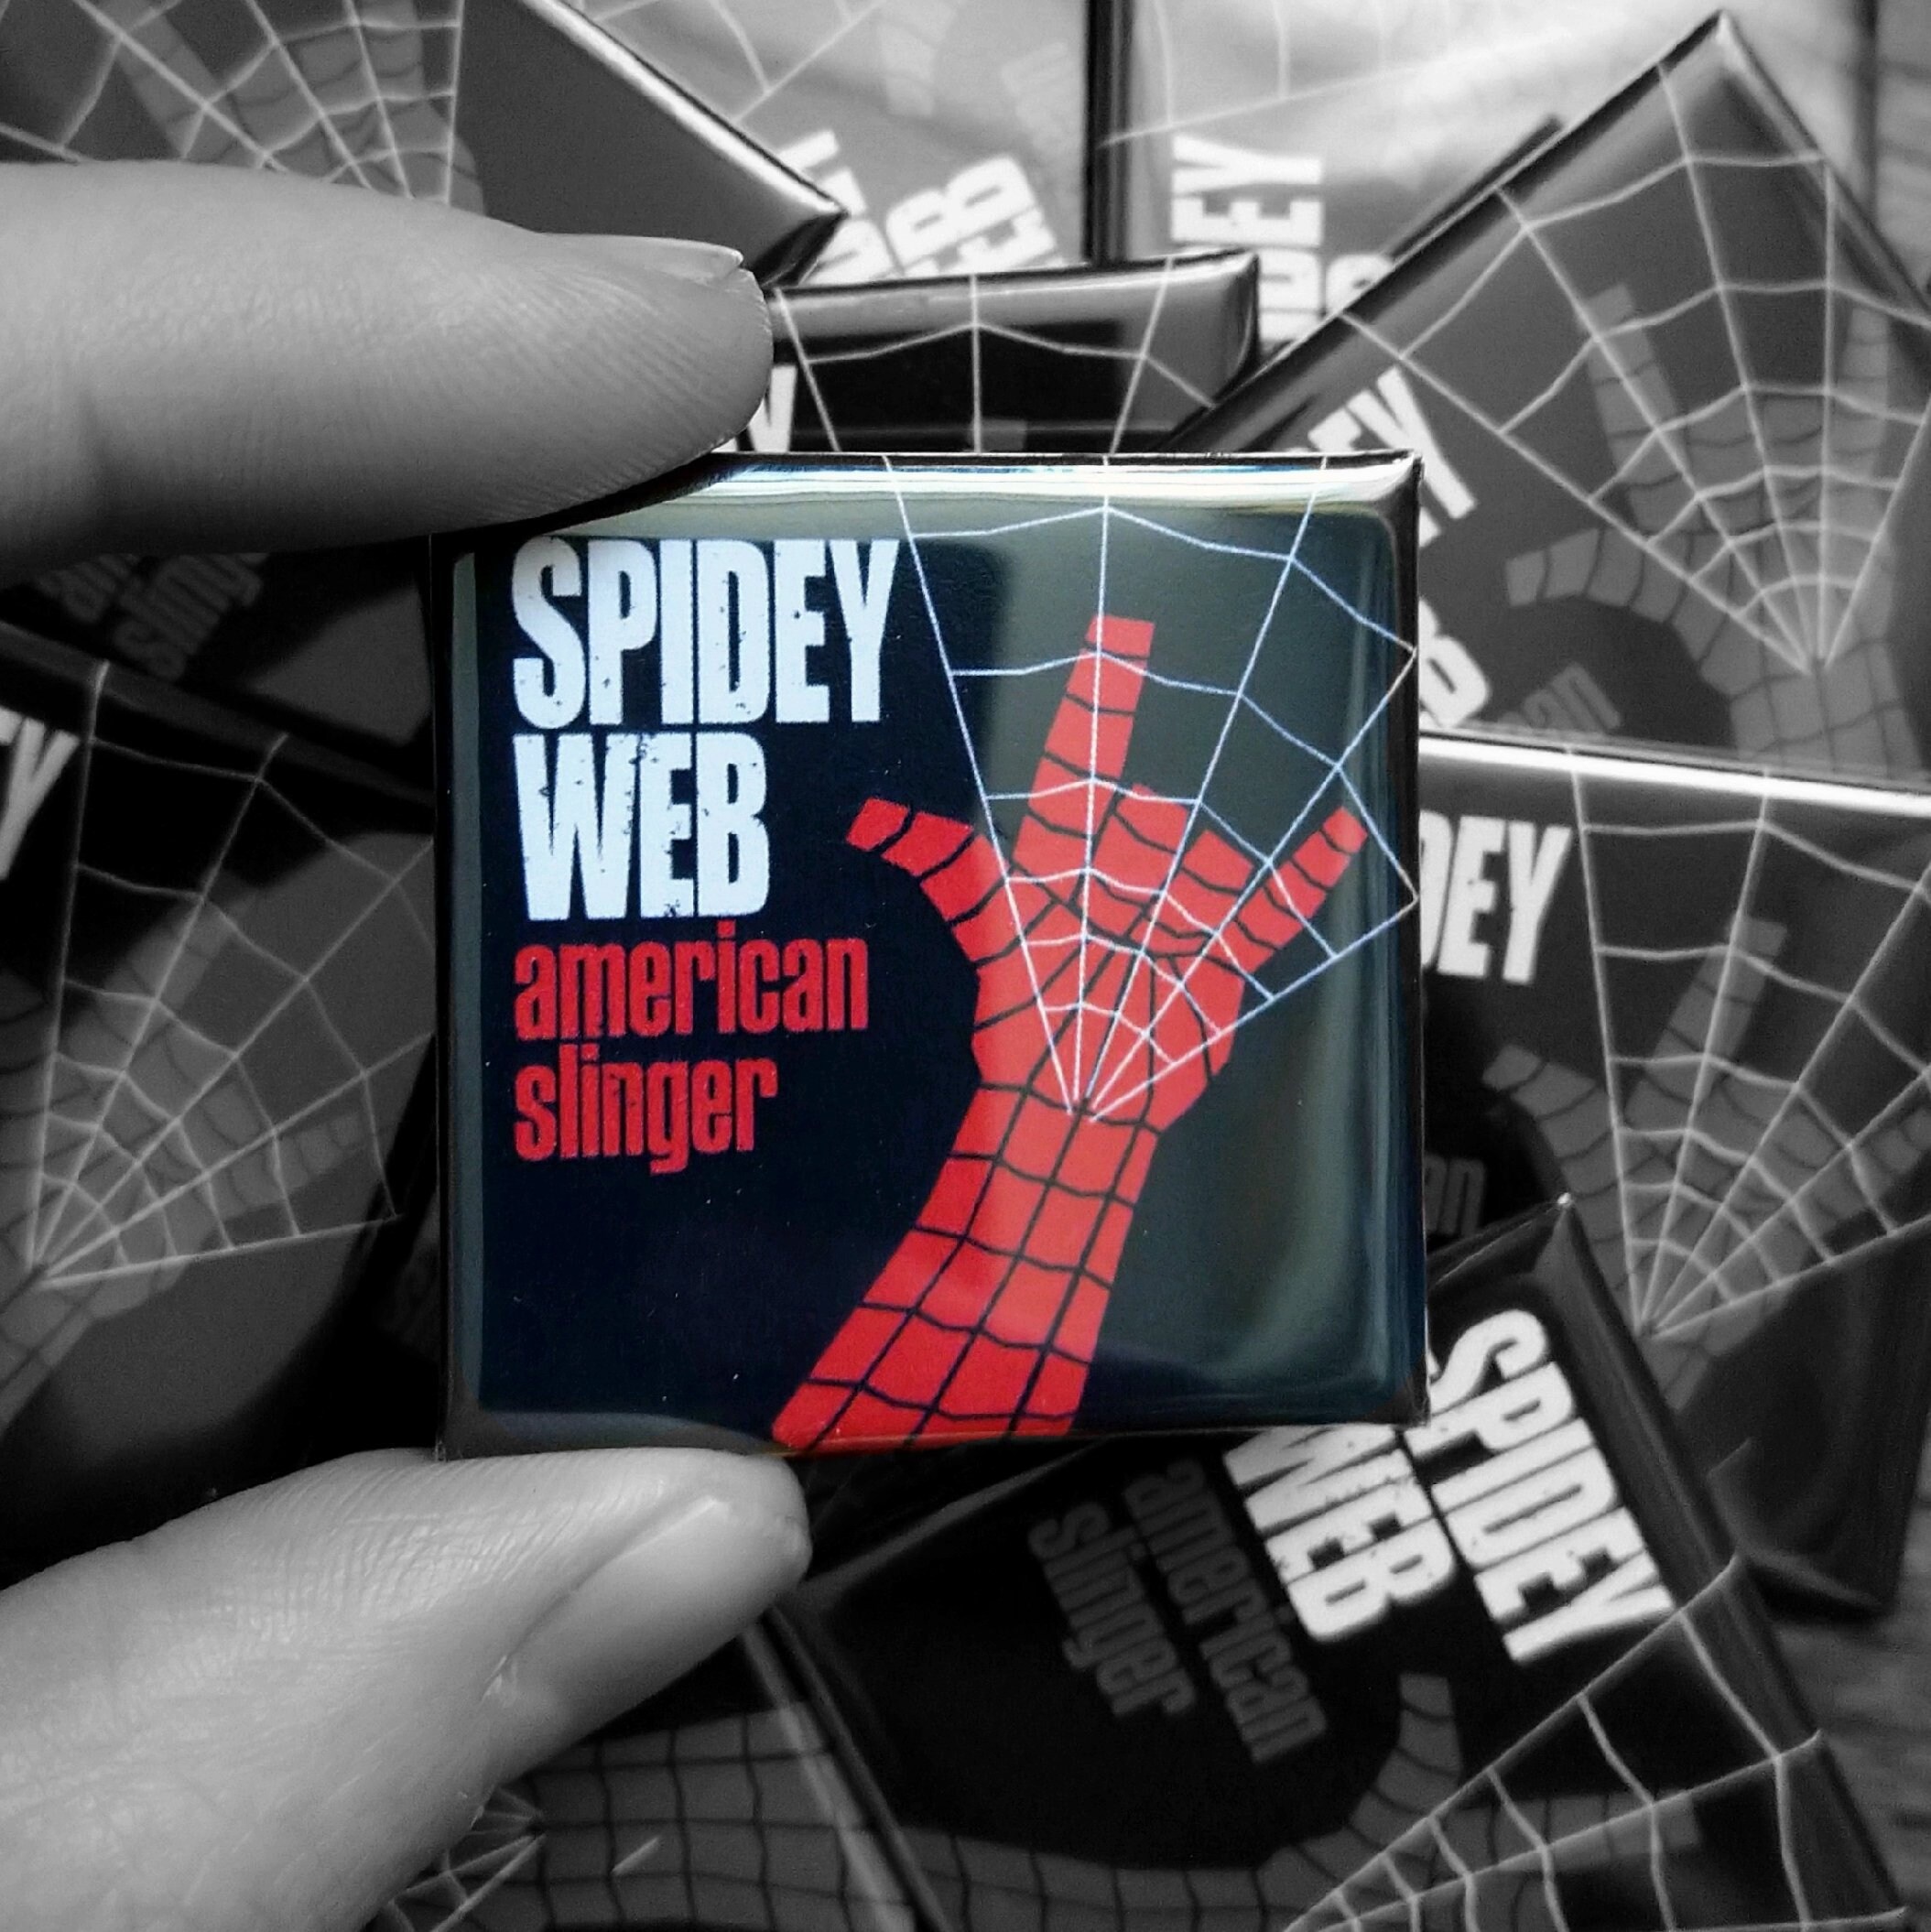 Spidey Web Spider Man Green Day American Idiot Album Cover Parody 38mm Square Button Badge